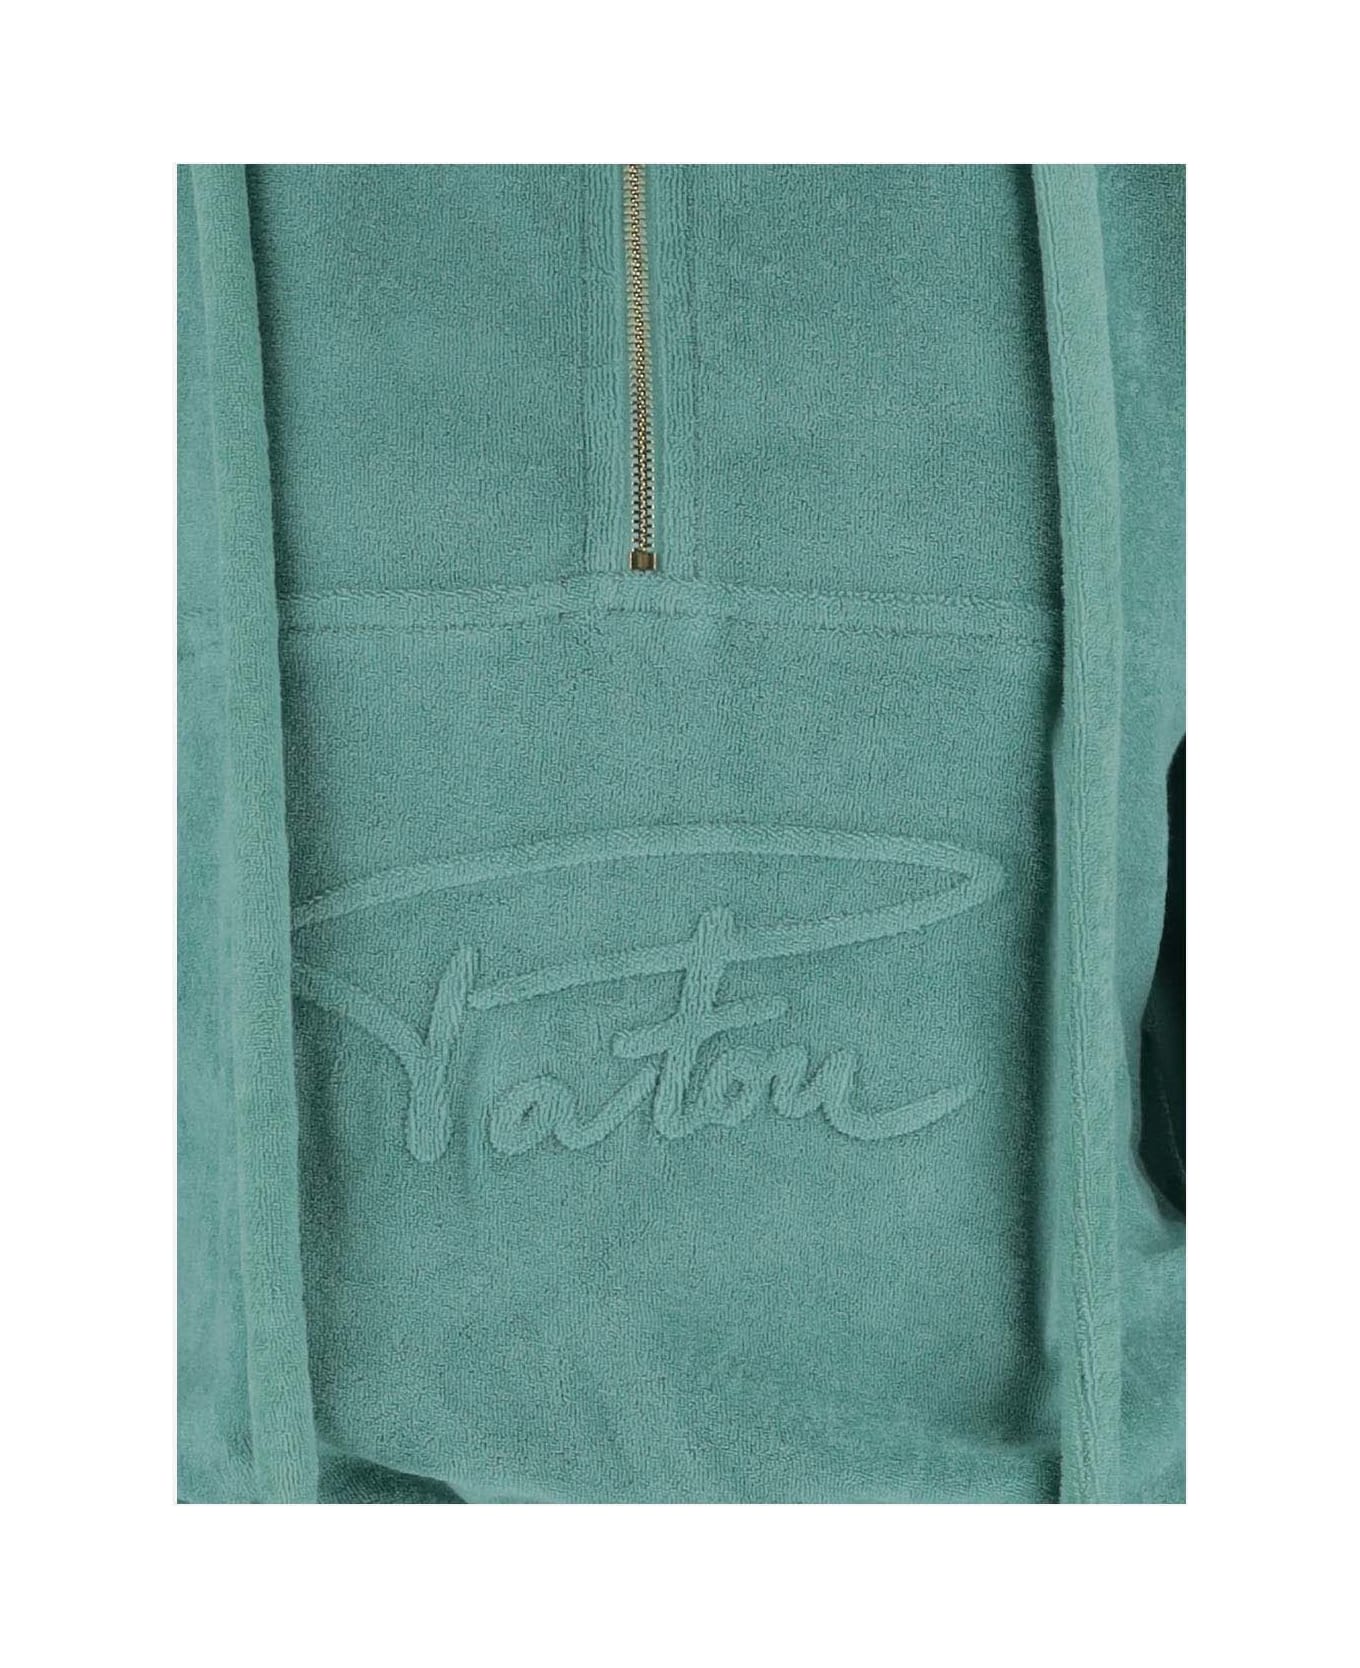 Patou Cotton Sweatshirt With Embossed Patou Signature - Green